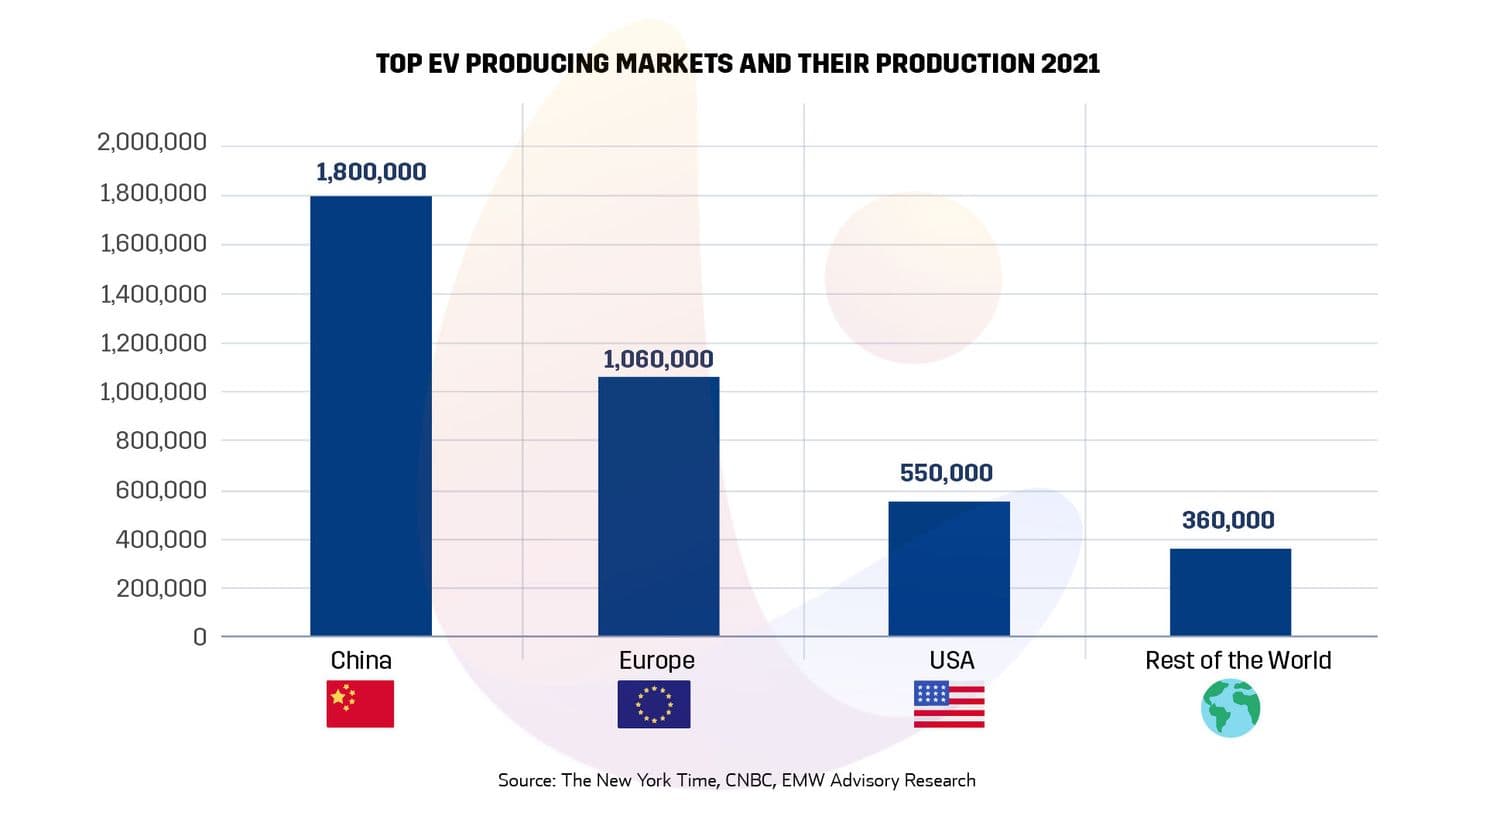 Top EV producing markets and their production 2021